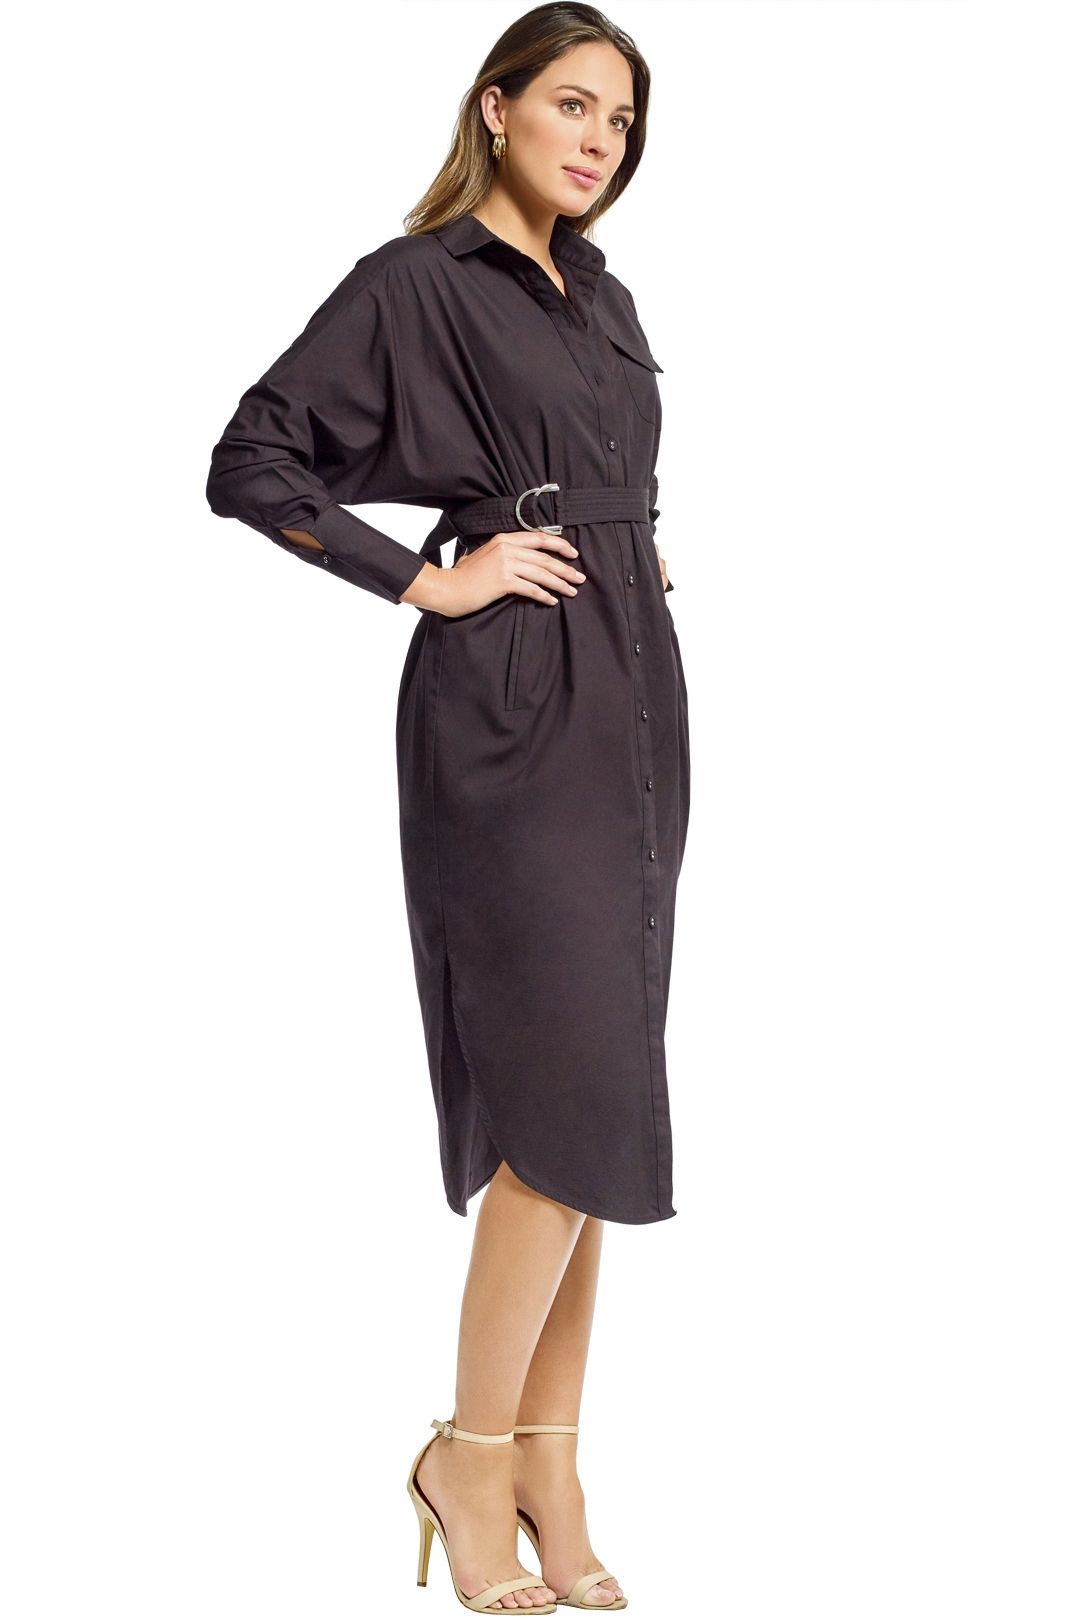 Cmeo Collective - Petition Shirt Dress - Black - Side